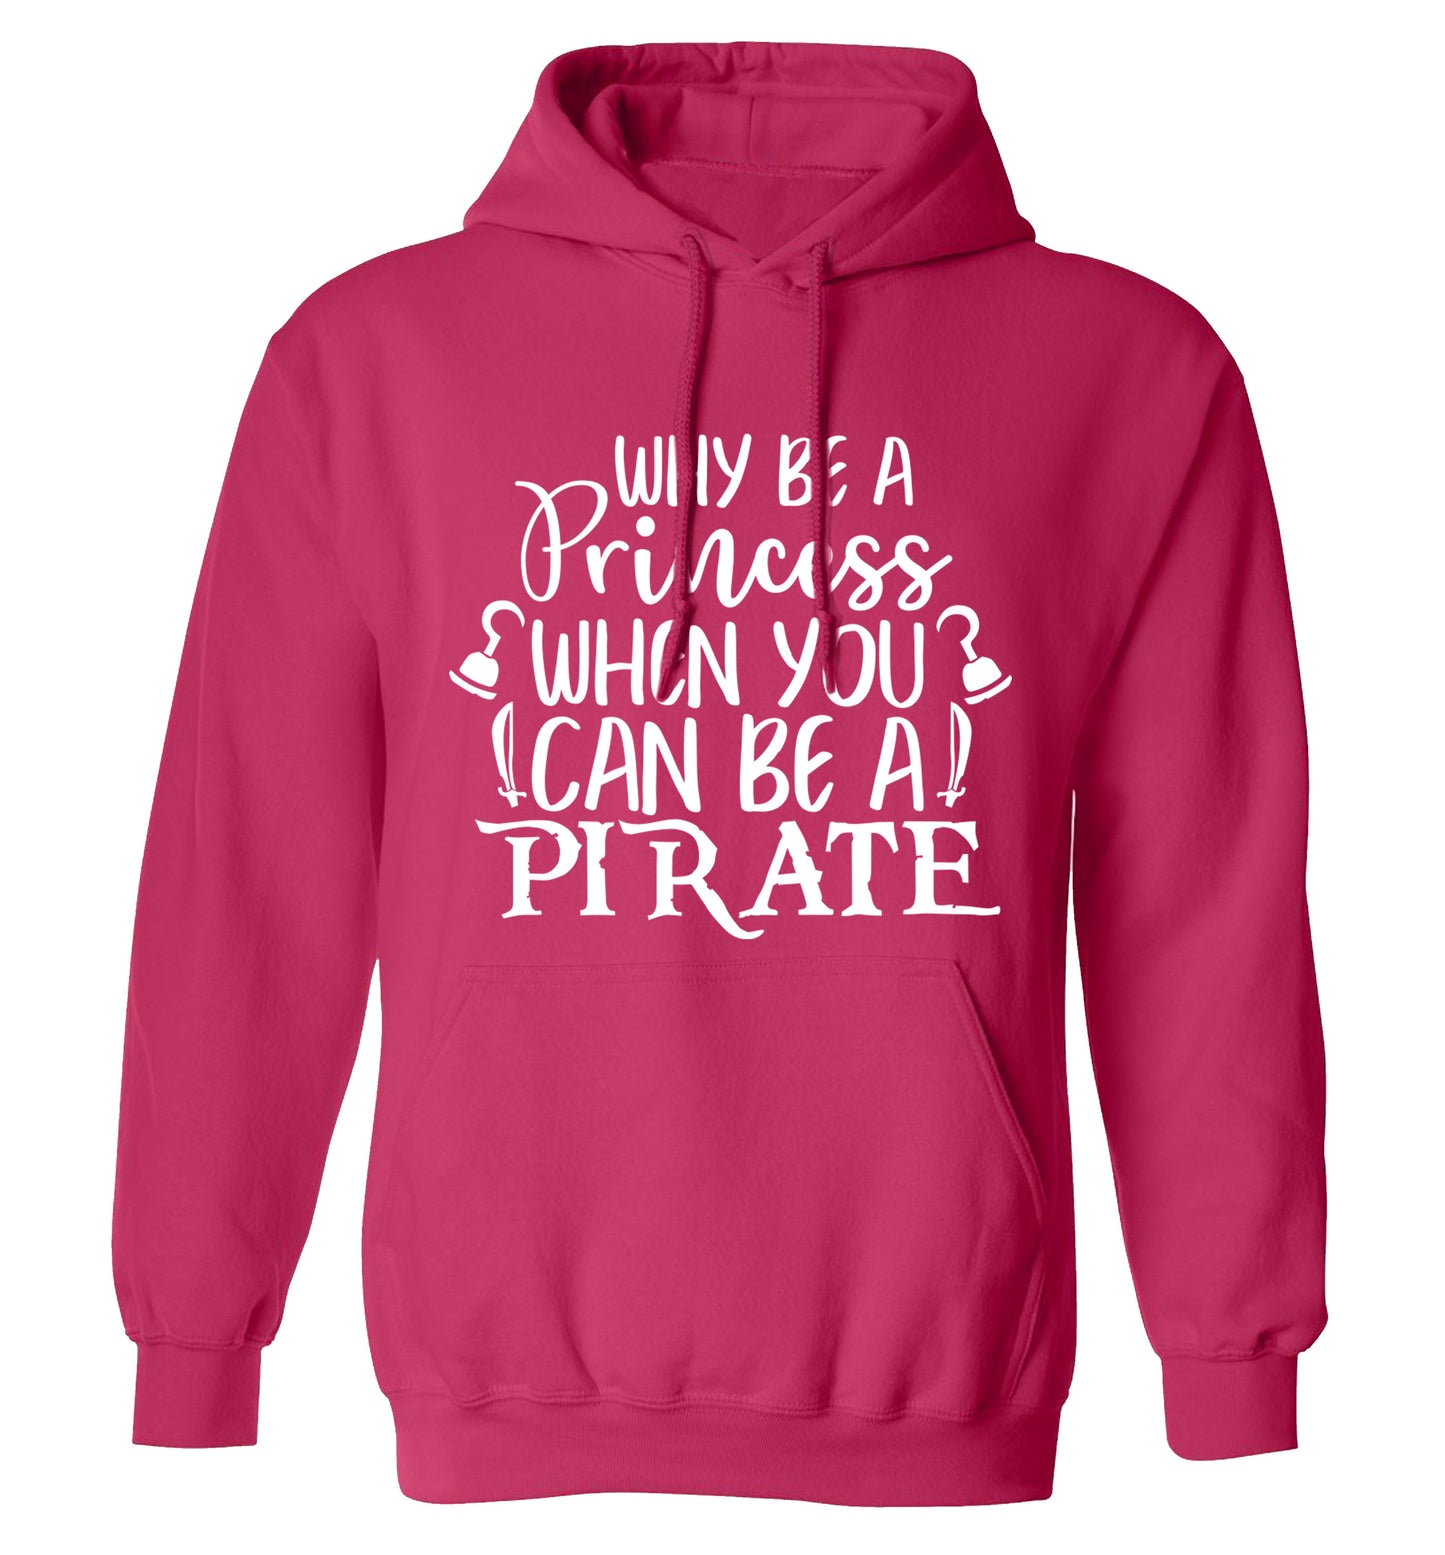 Why be a princess when you can be a pirate? adults unisex pink hoodie 2XL